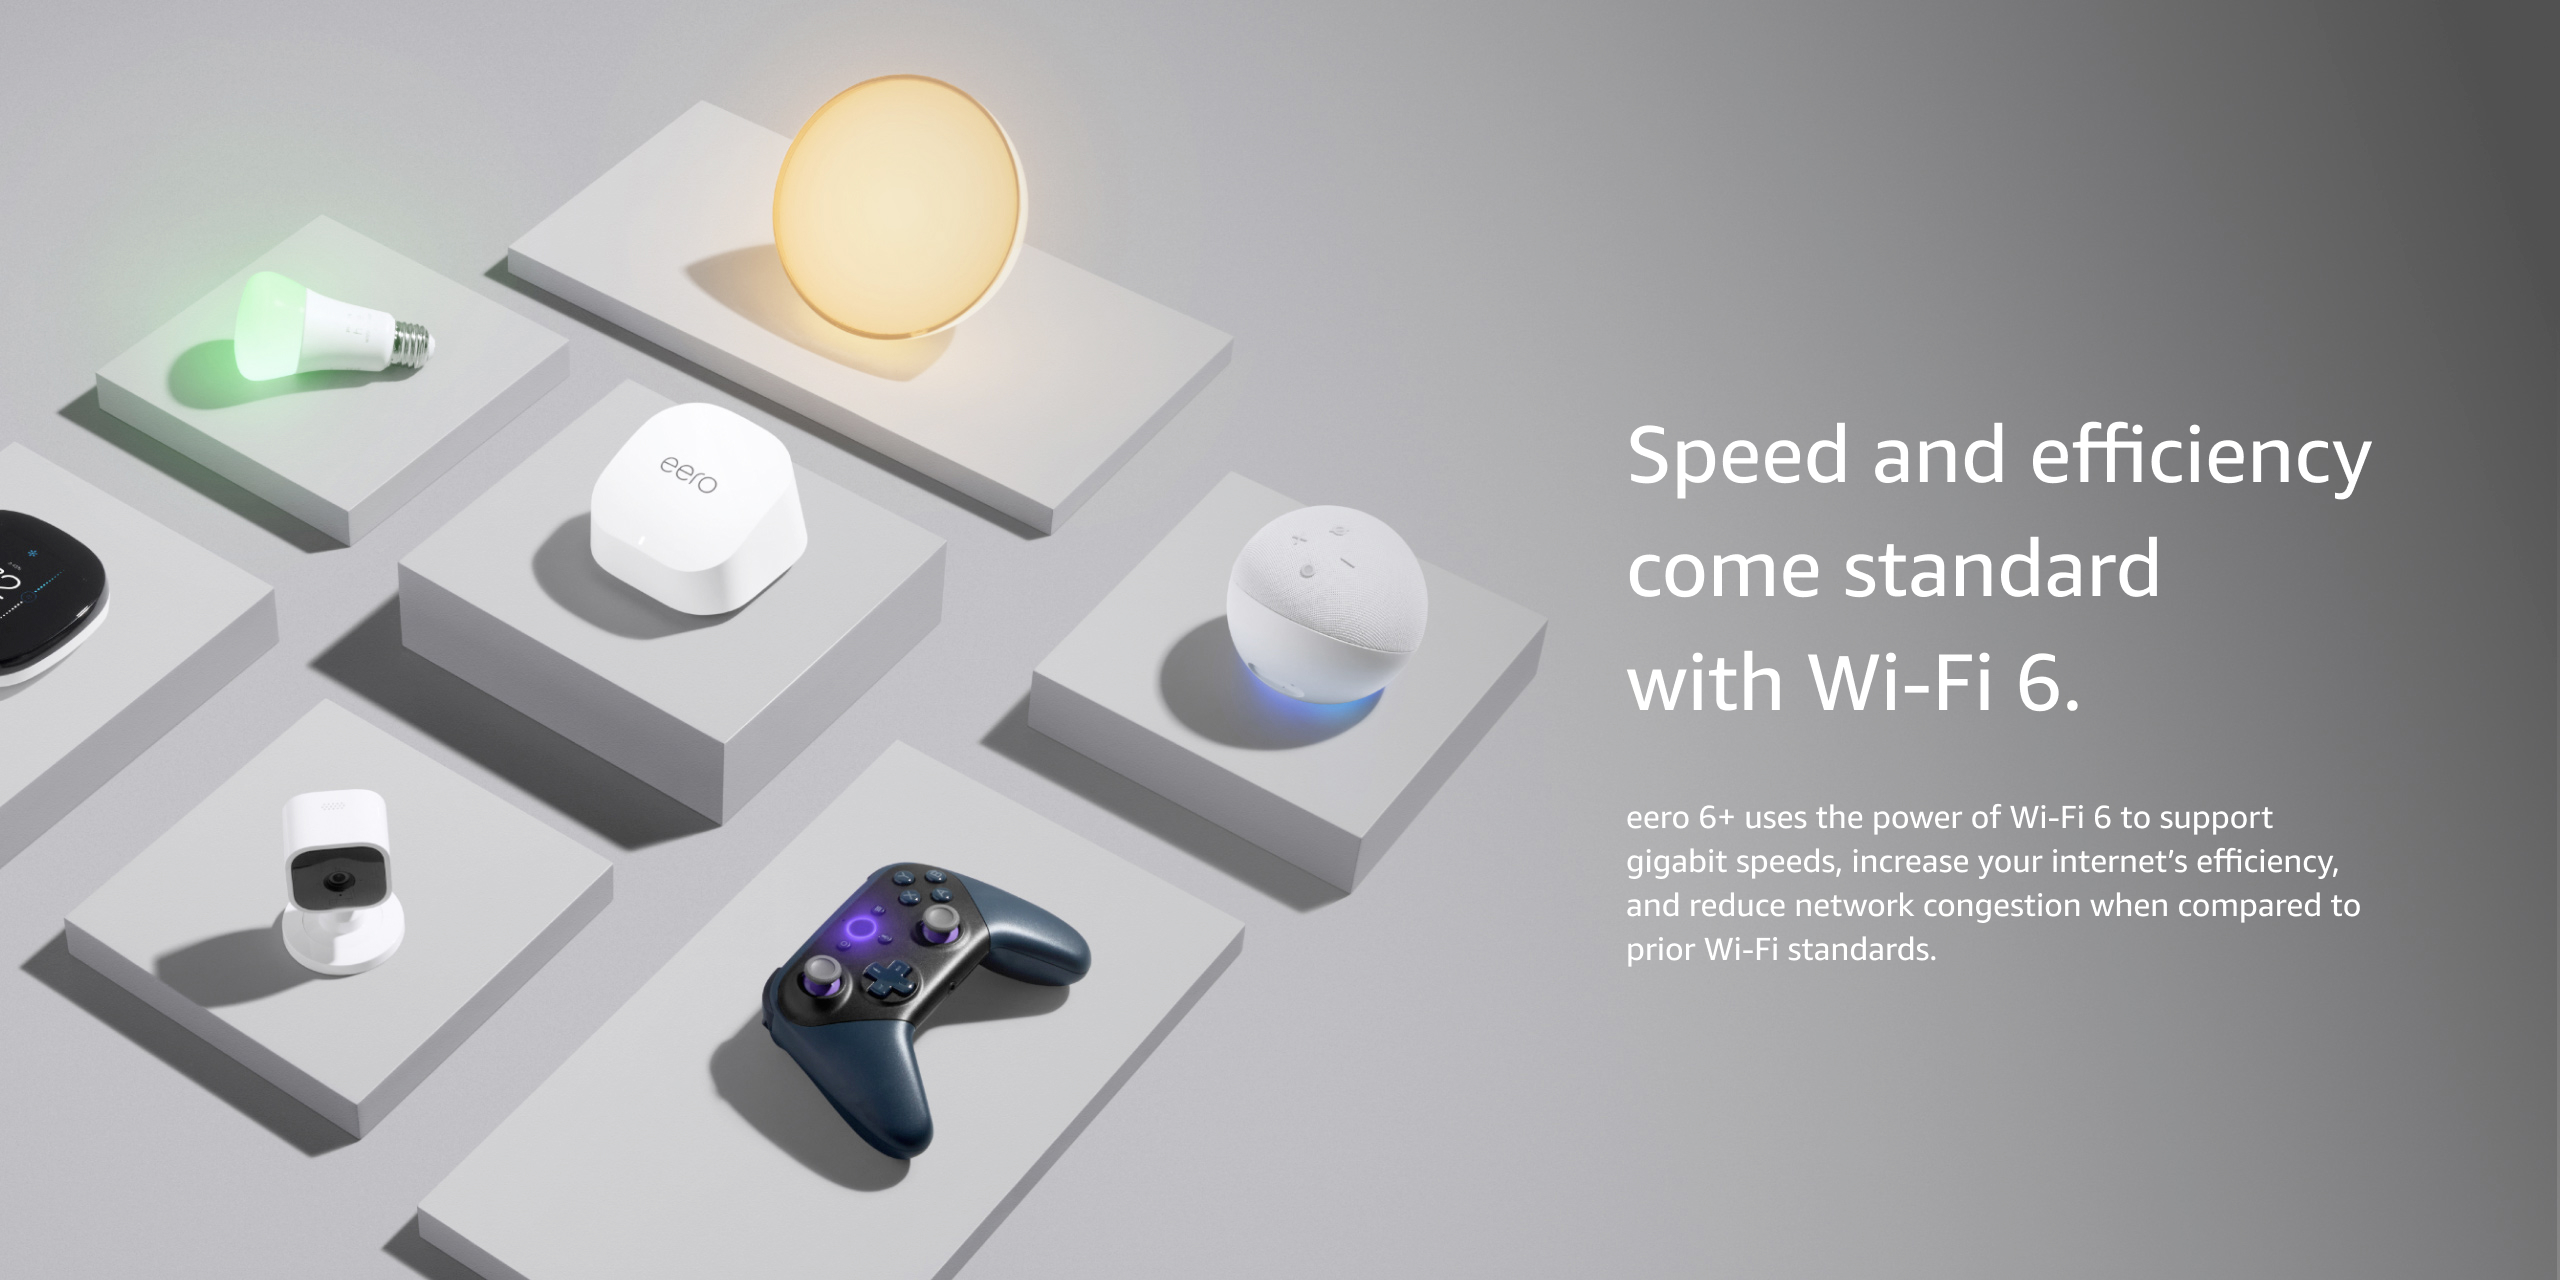 Speed and efficiency come standard with Wi-Fi 6